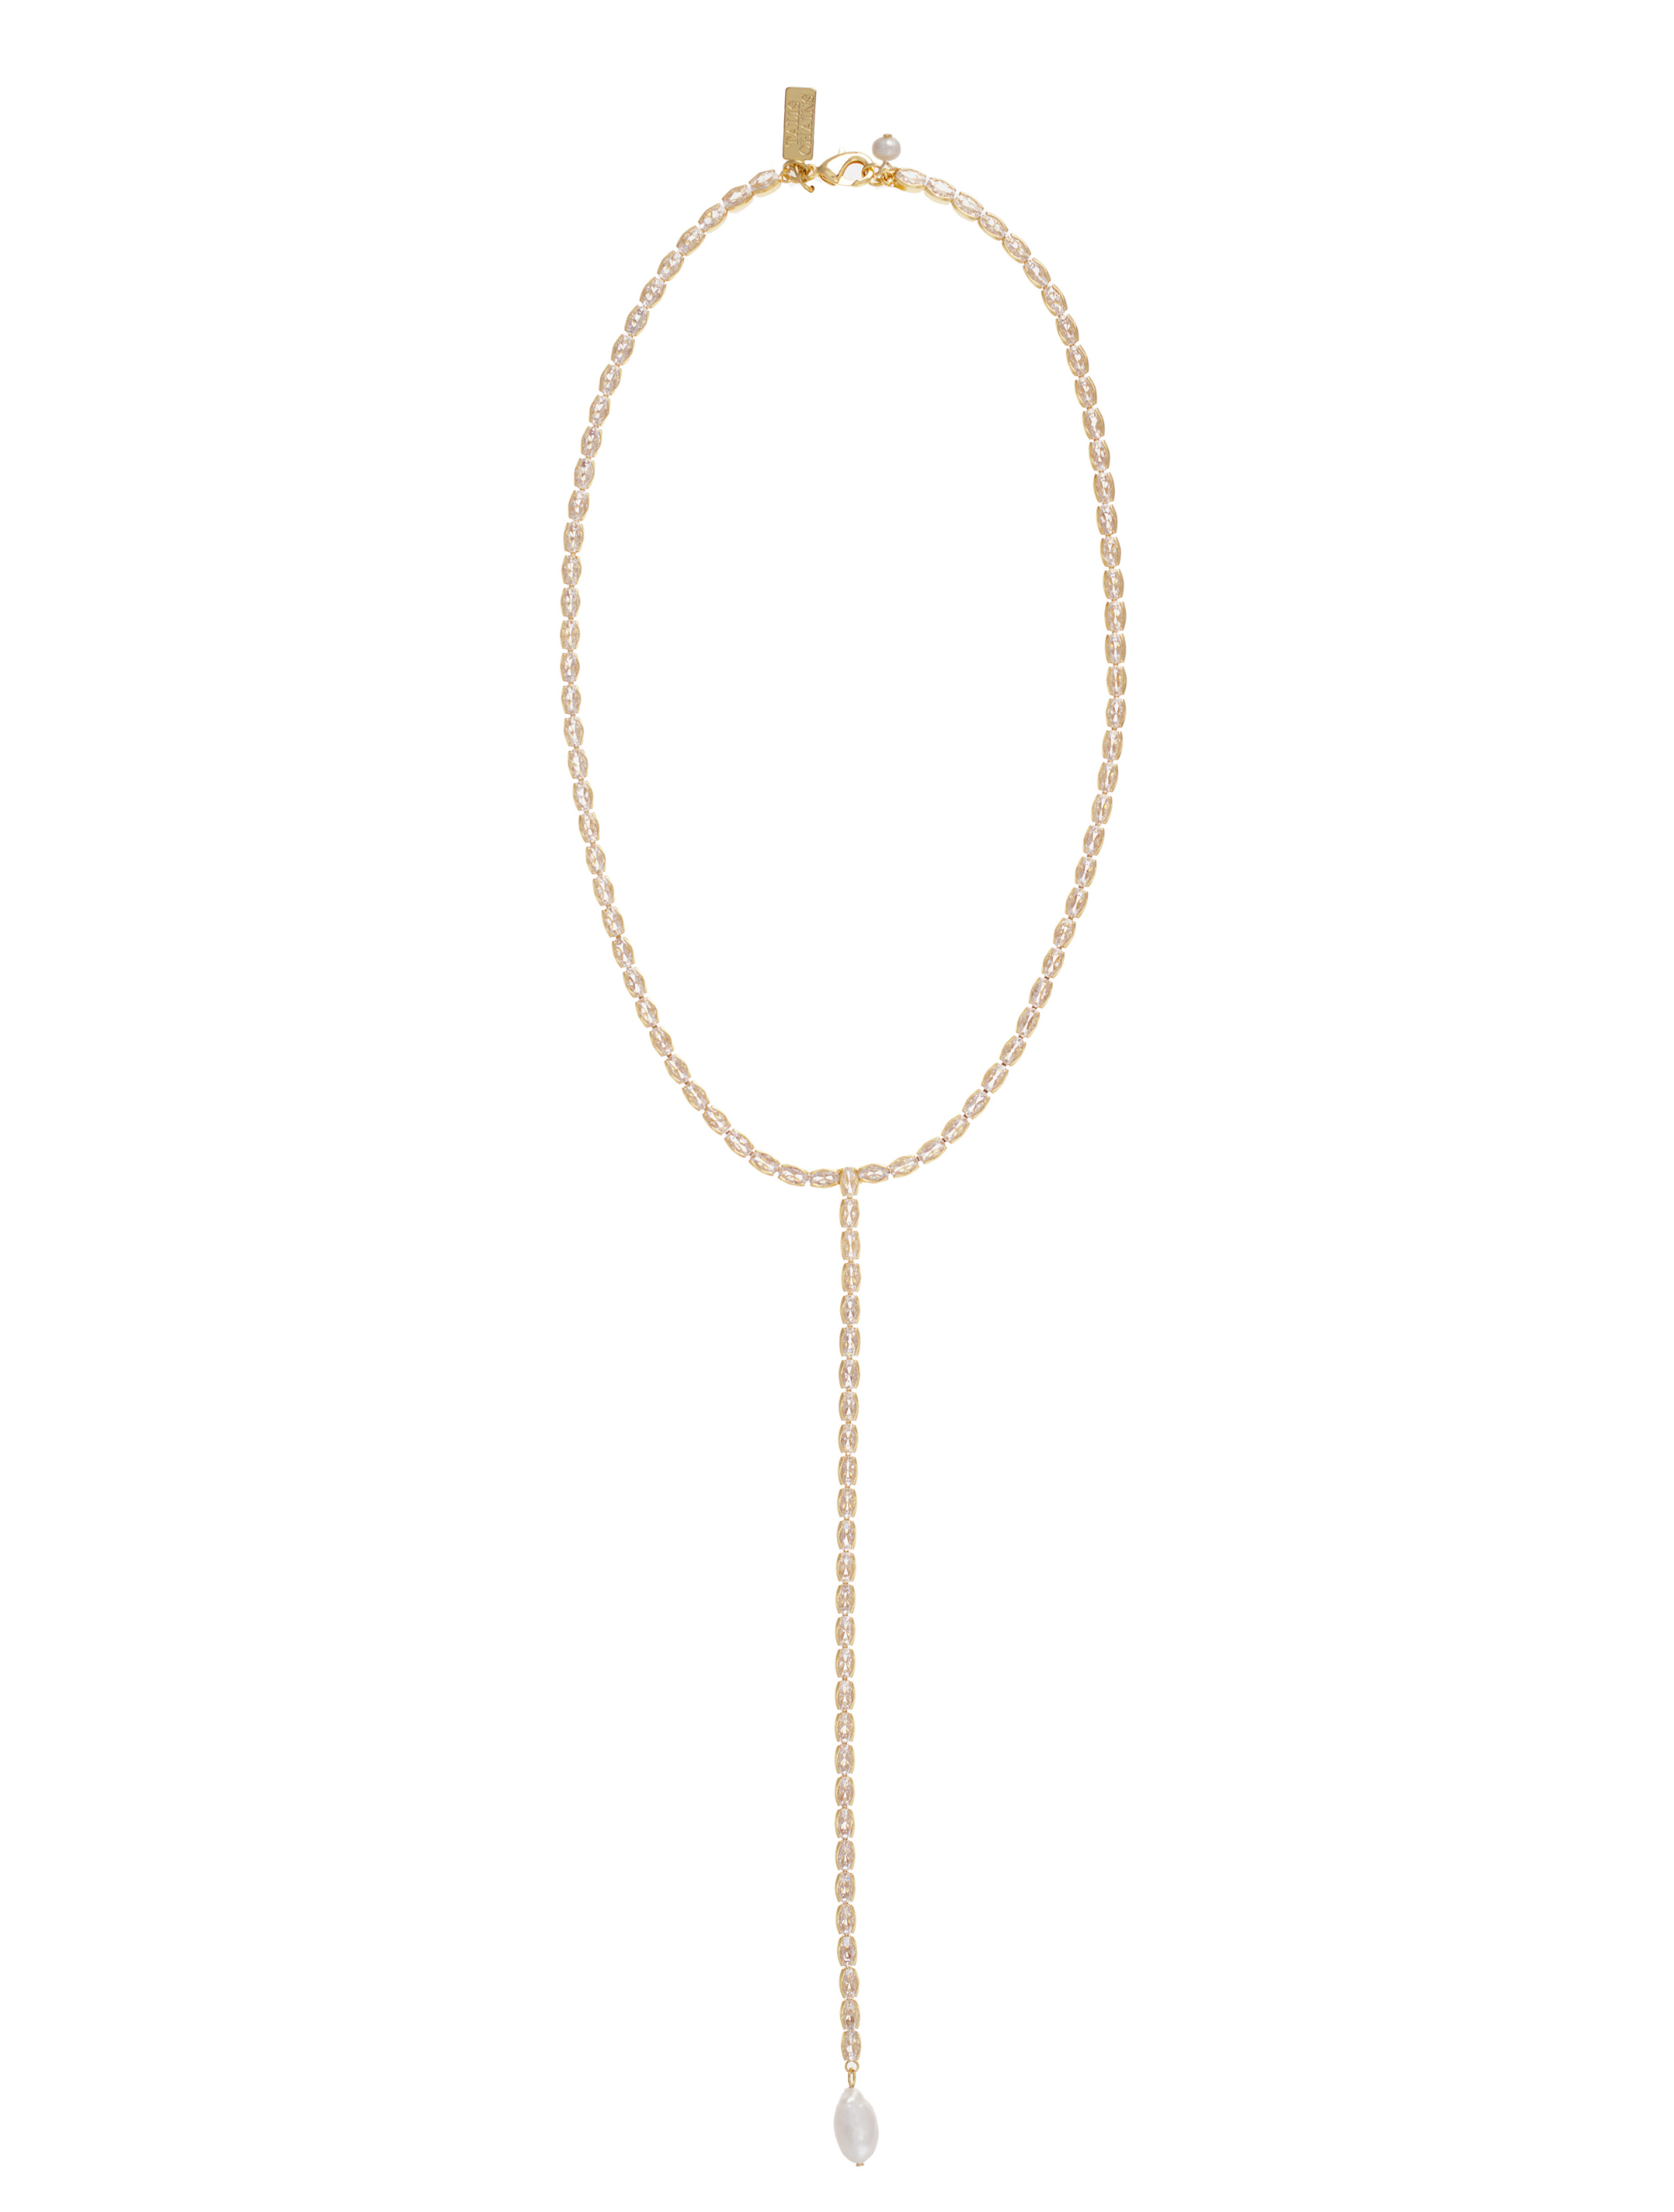 Oval cut Cubic Ziconia gold plated lanyard necklace with fresh water pearl feature and lobster claw fastening